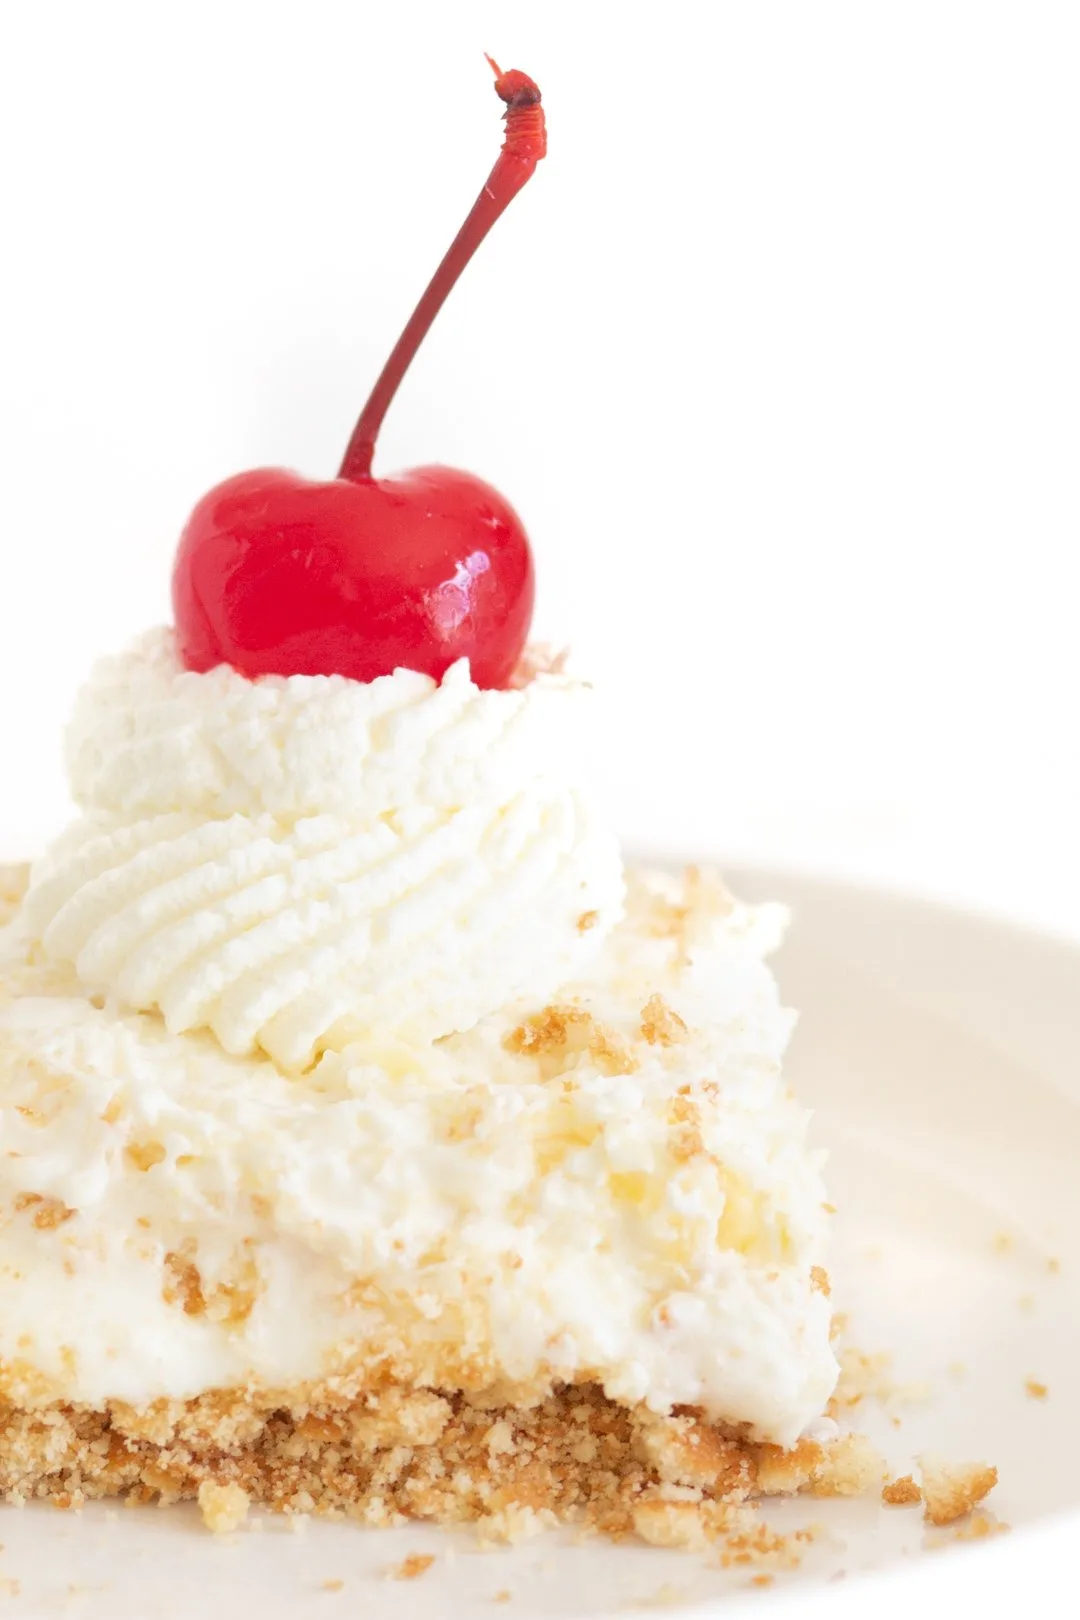 piece of pineapple cream dessert up close. topped with double layer of whipped cream an a maraschino cherry